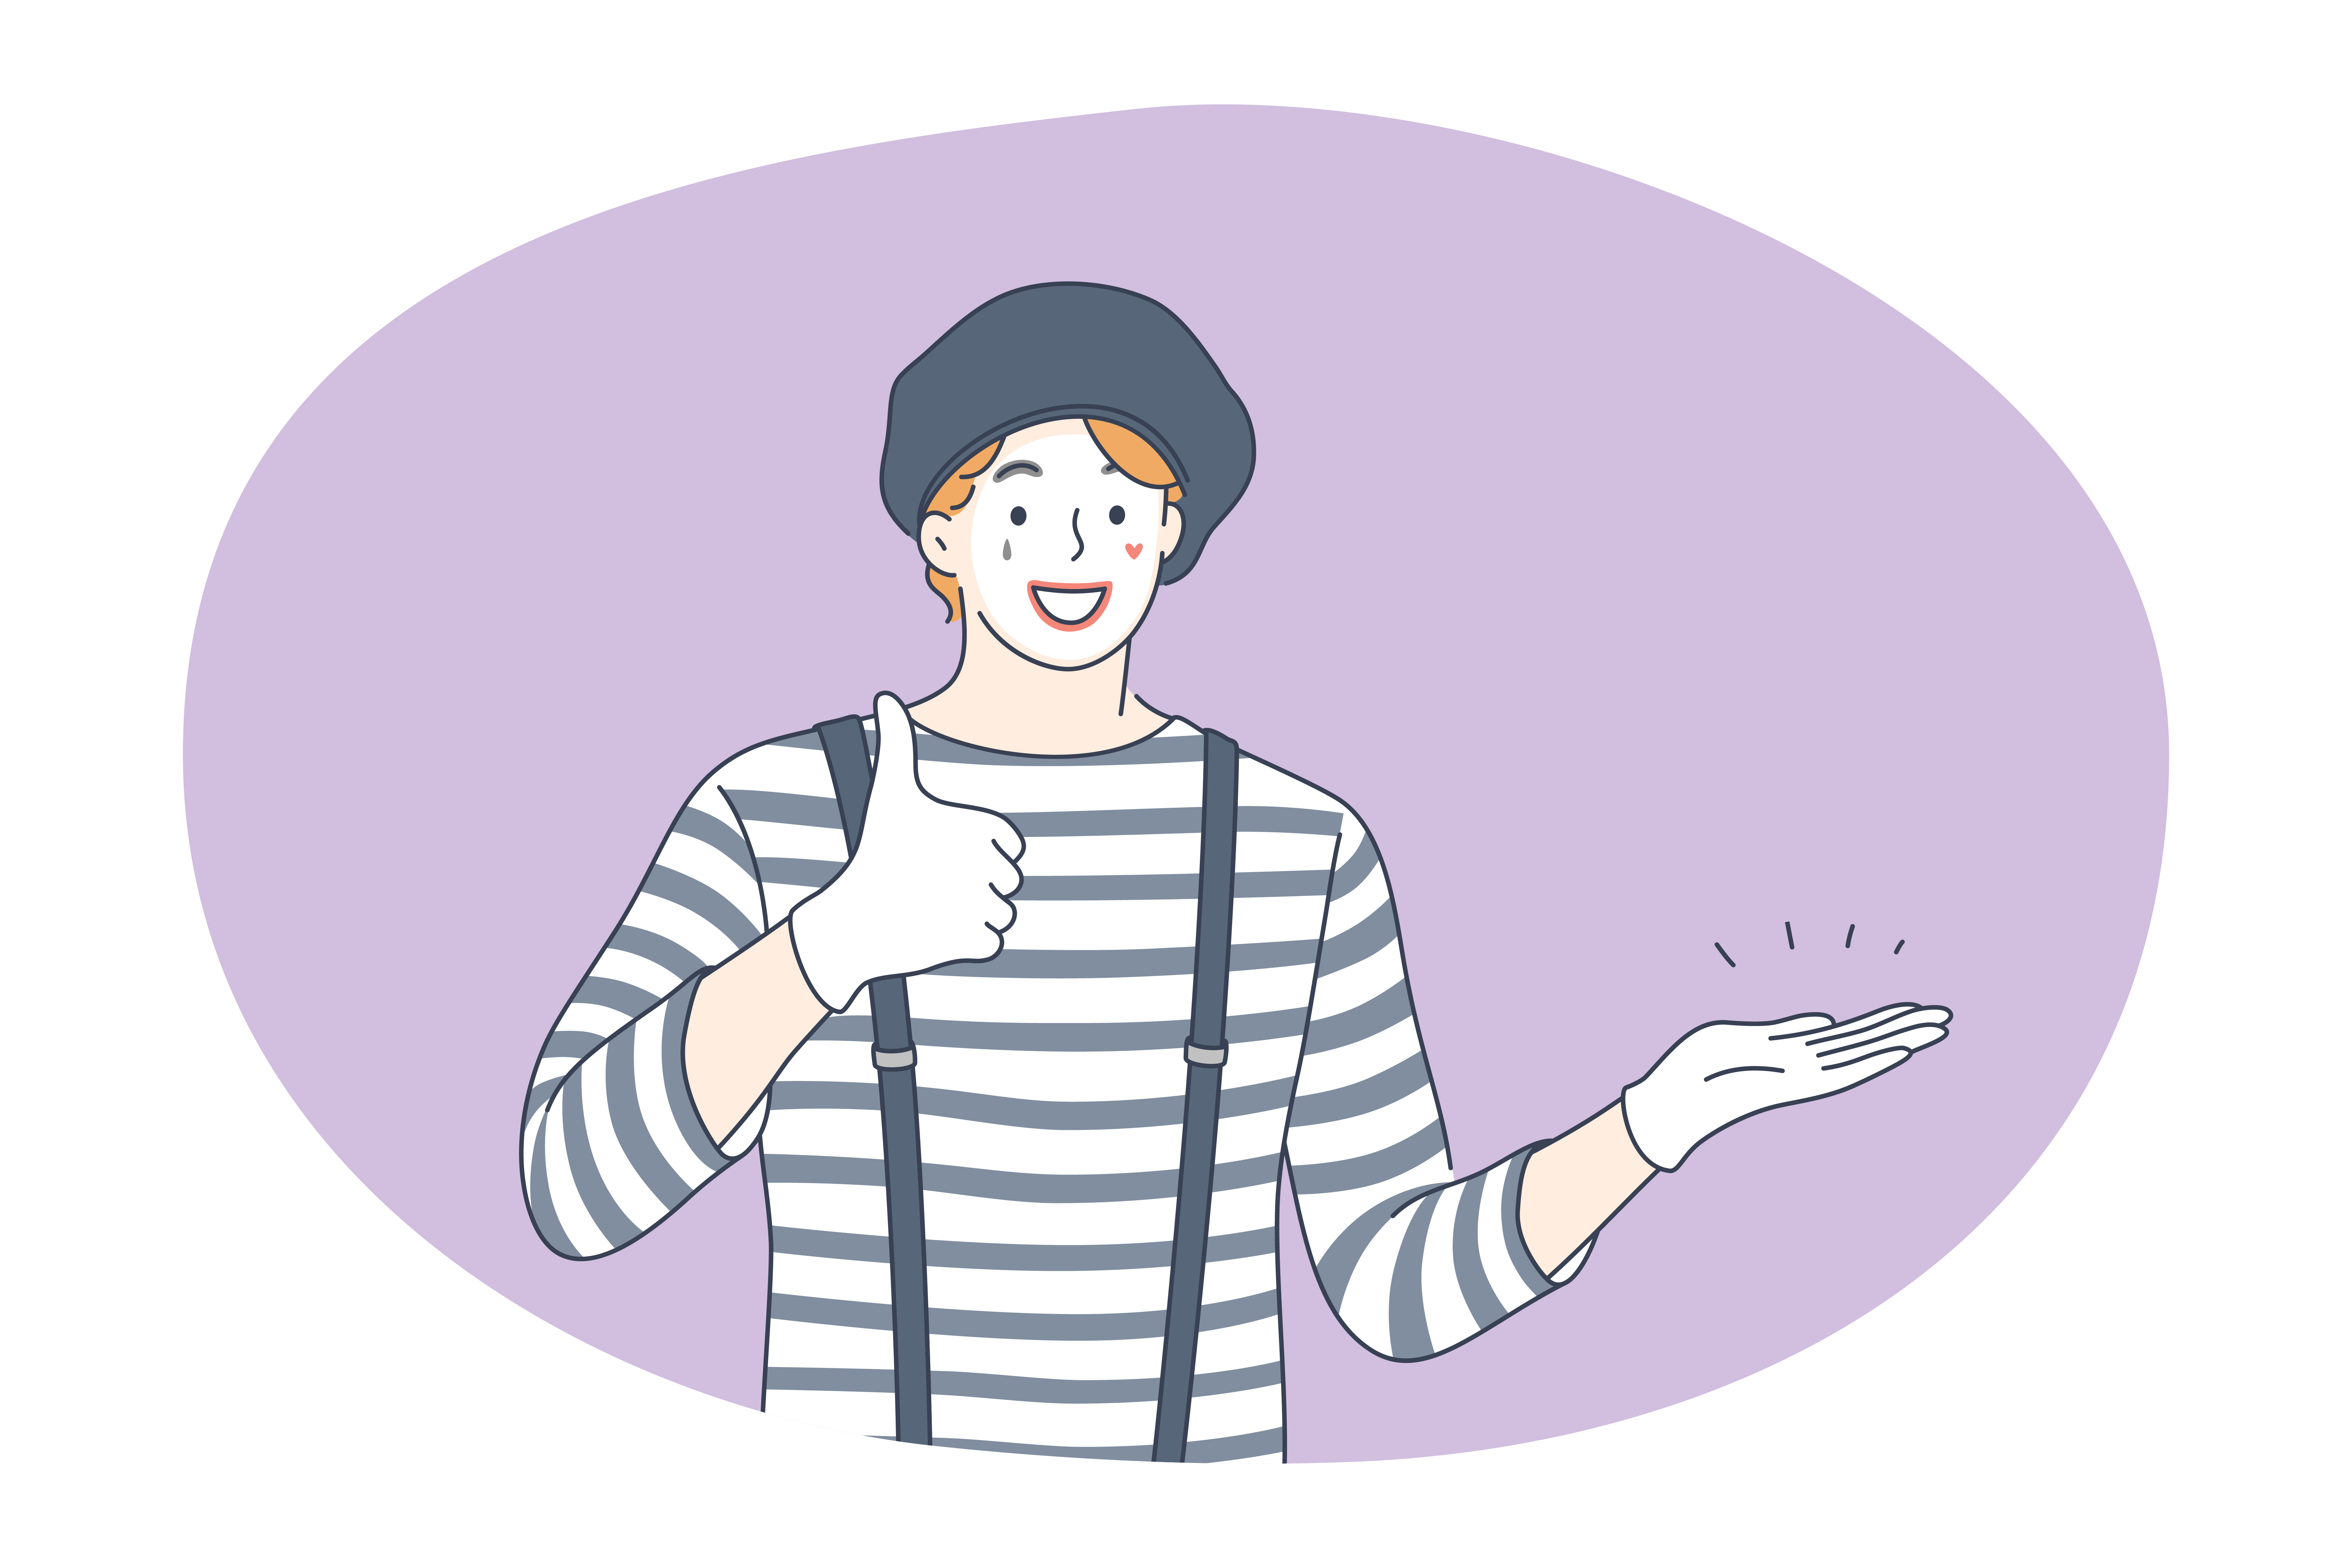 Circus, performance, entertainment concept. Young man clown performer cartoon character in striped costume and cap showing thumbs up sign during circus show. Leisure, art, performer illustration. Circus, performance, entertainment concept